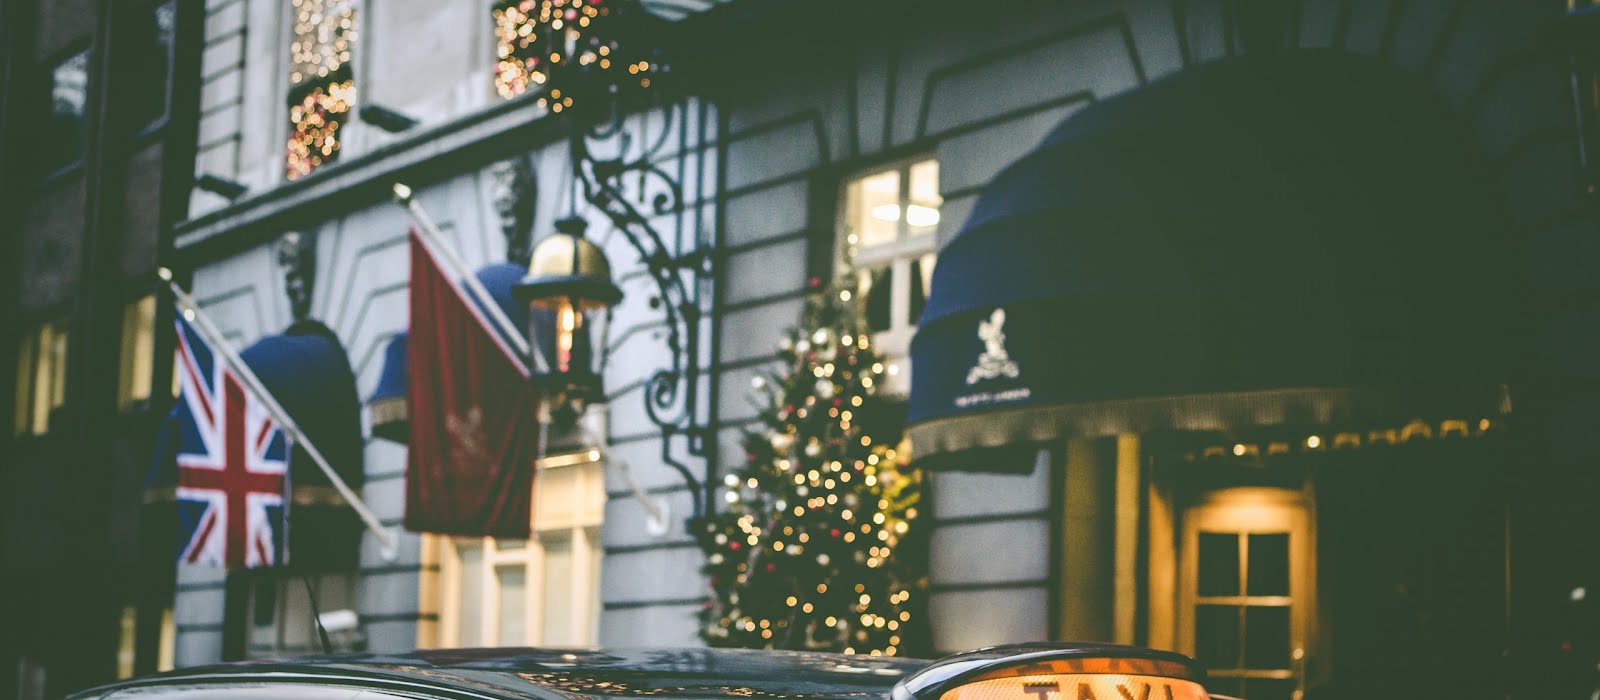 Planning a festive trip to London this year? These hotels really know how to do Christmas